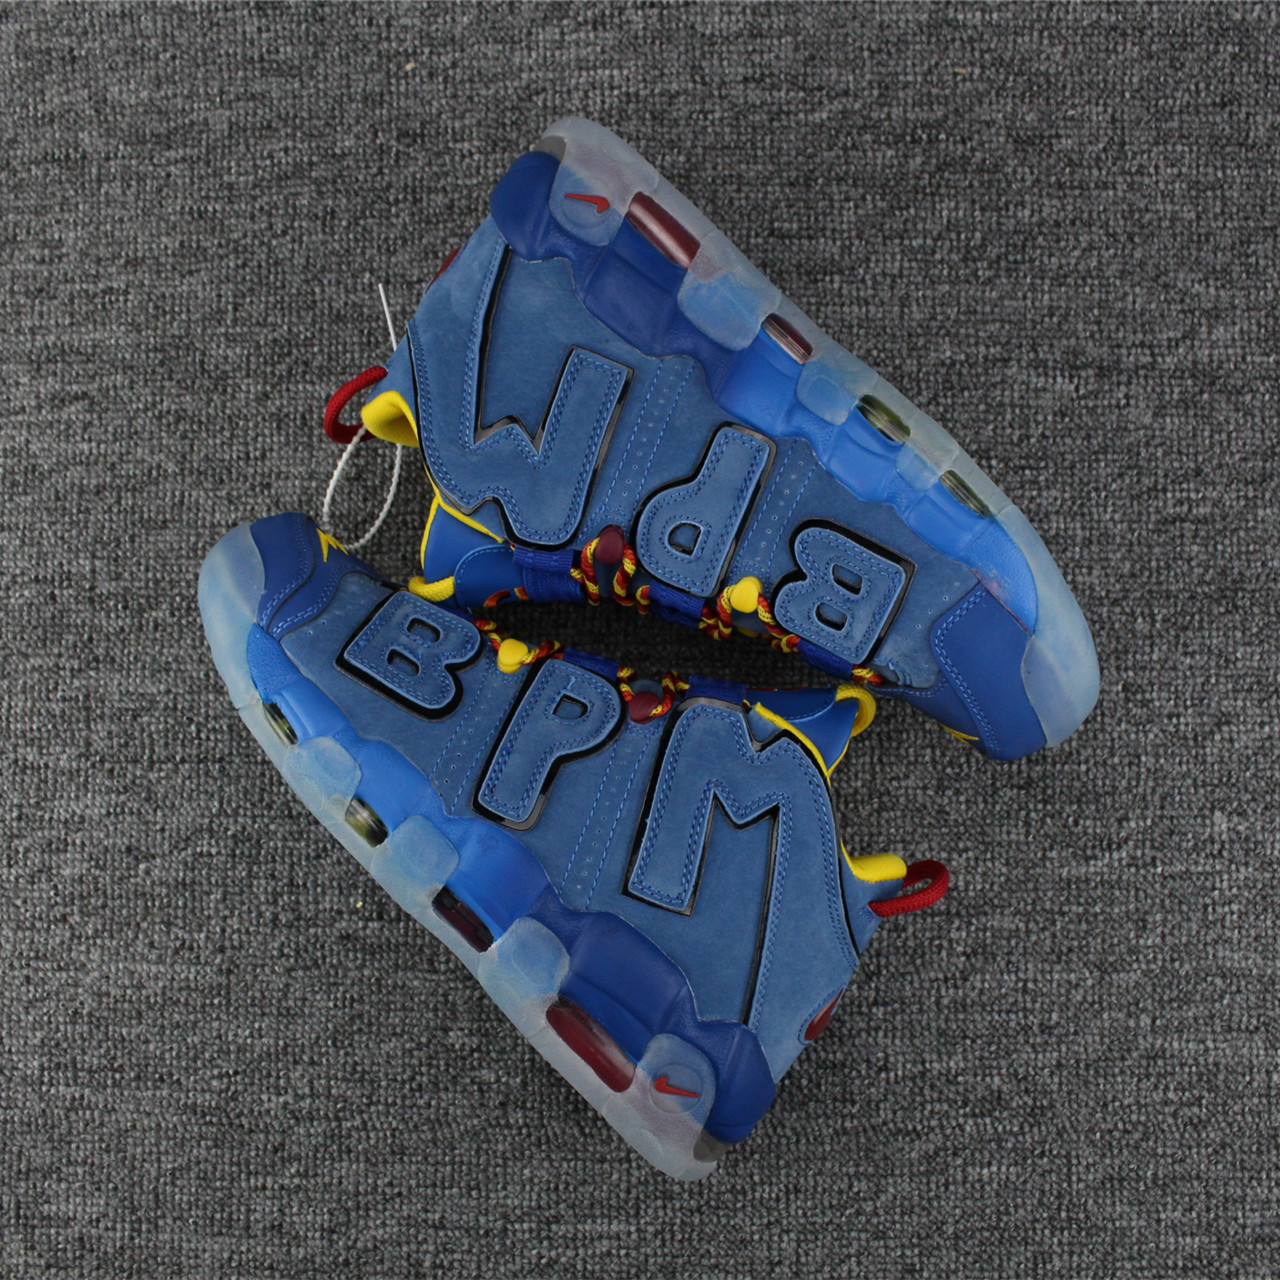 New Nike Air More Uptempo Deer Skin Blue Wine Red Yellow Shoes